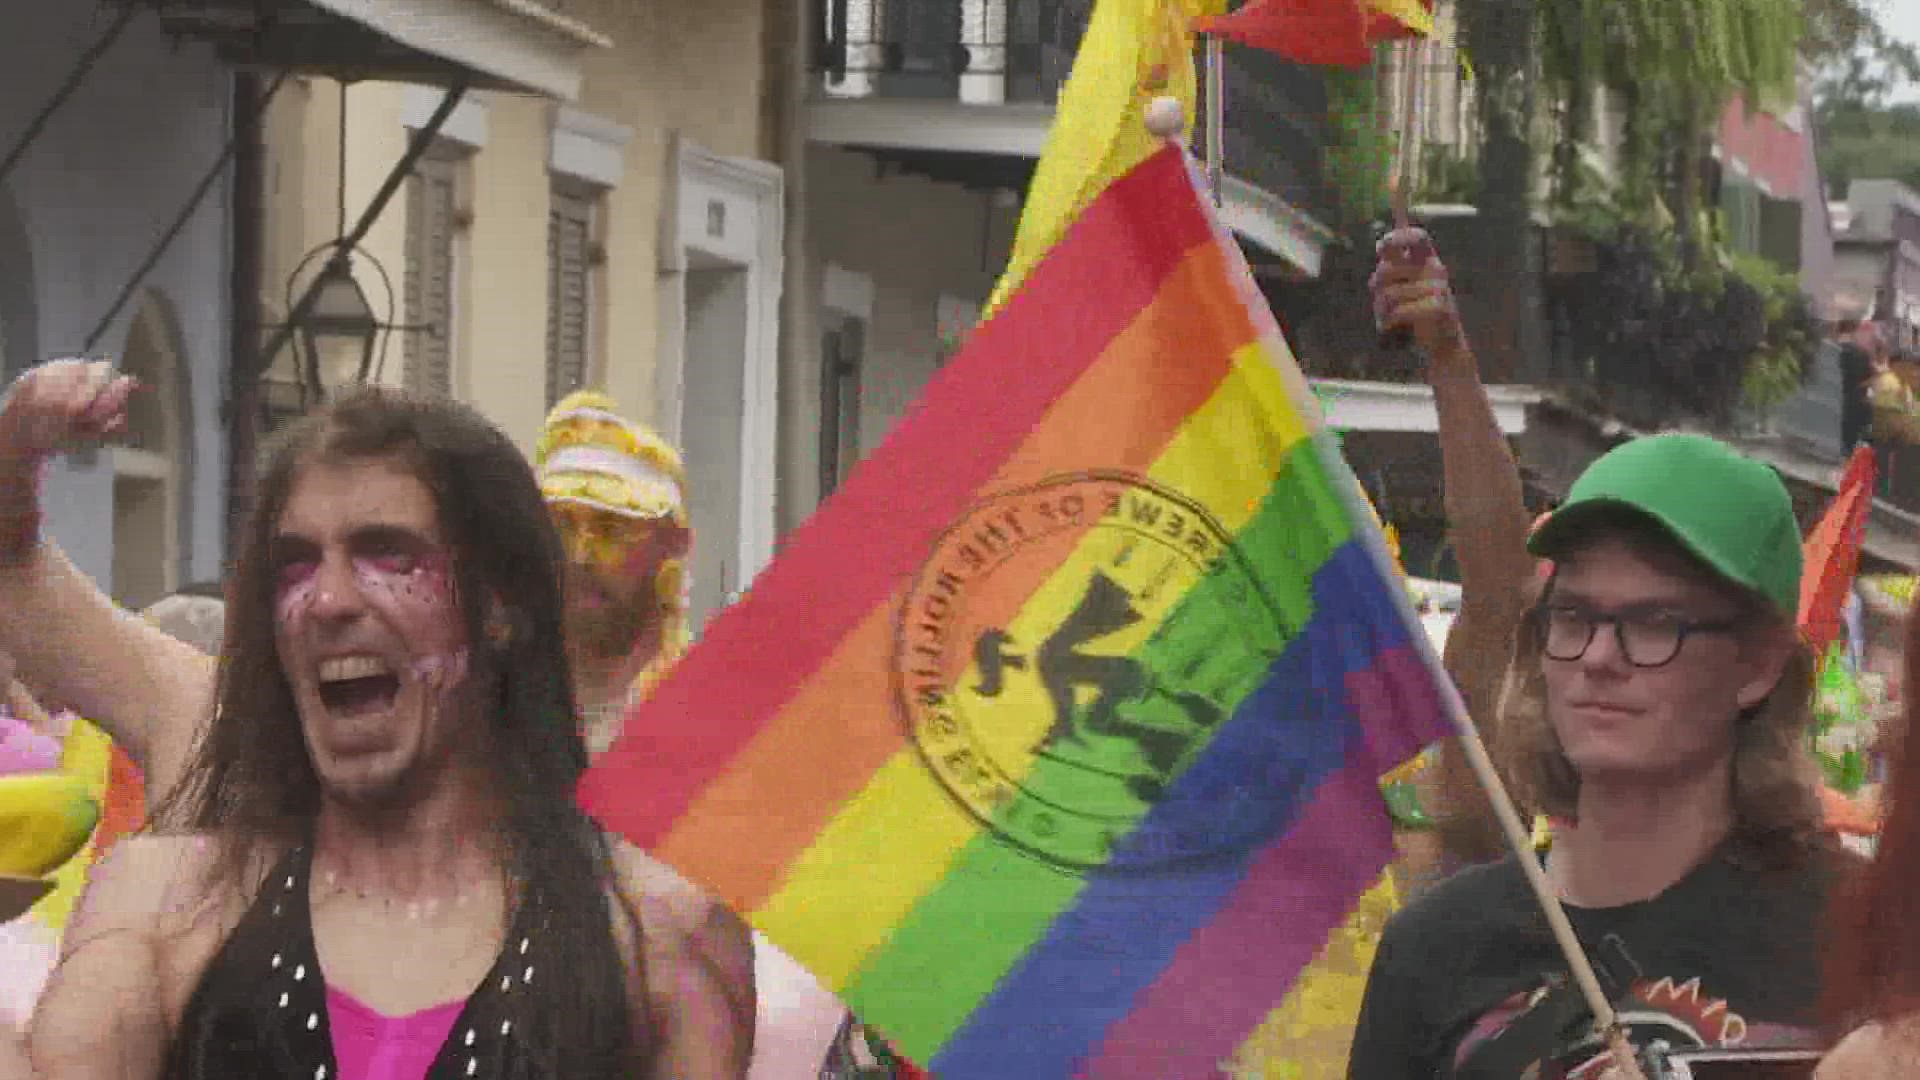 Southern Decadence started as a house party 50 years ago.